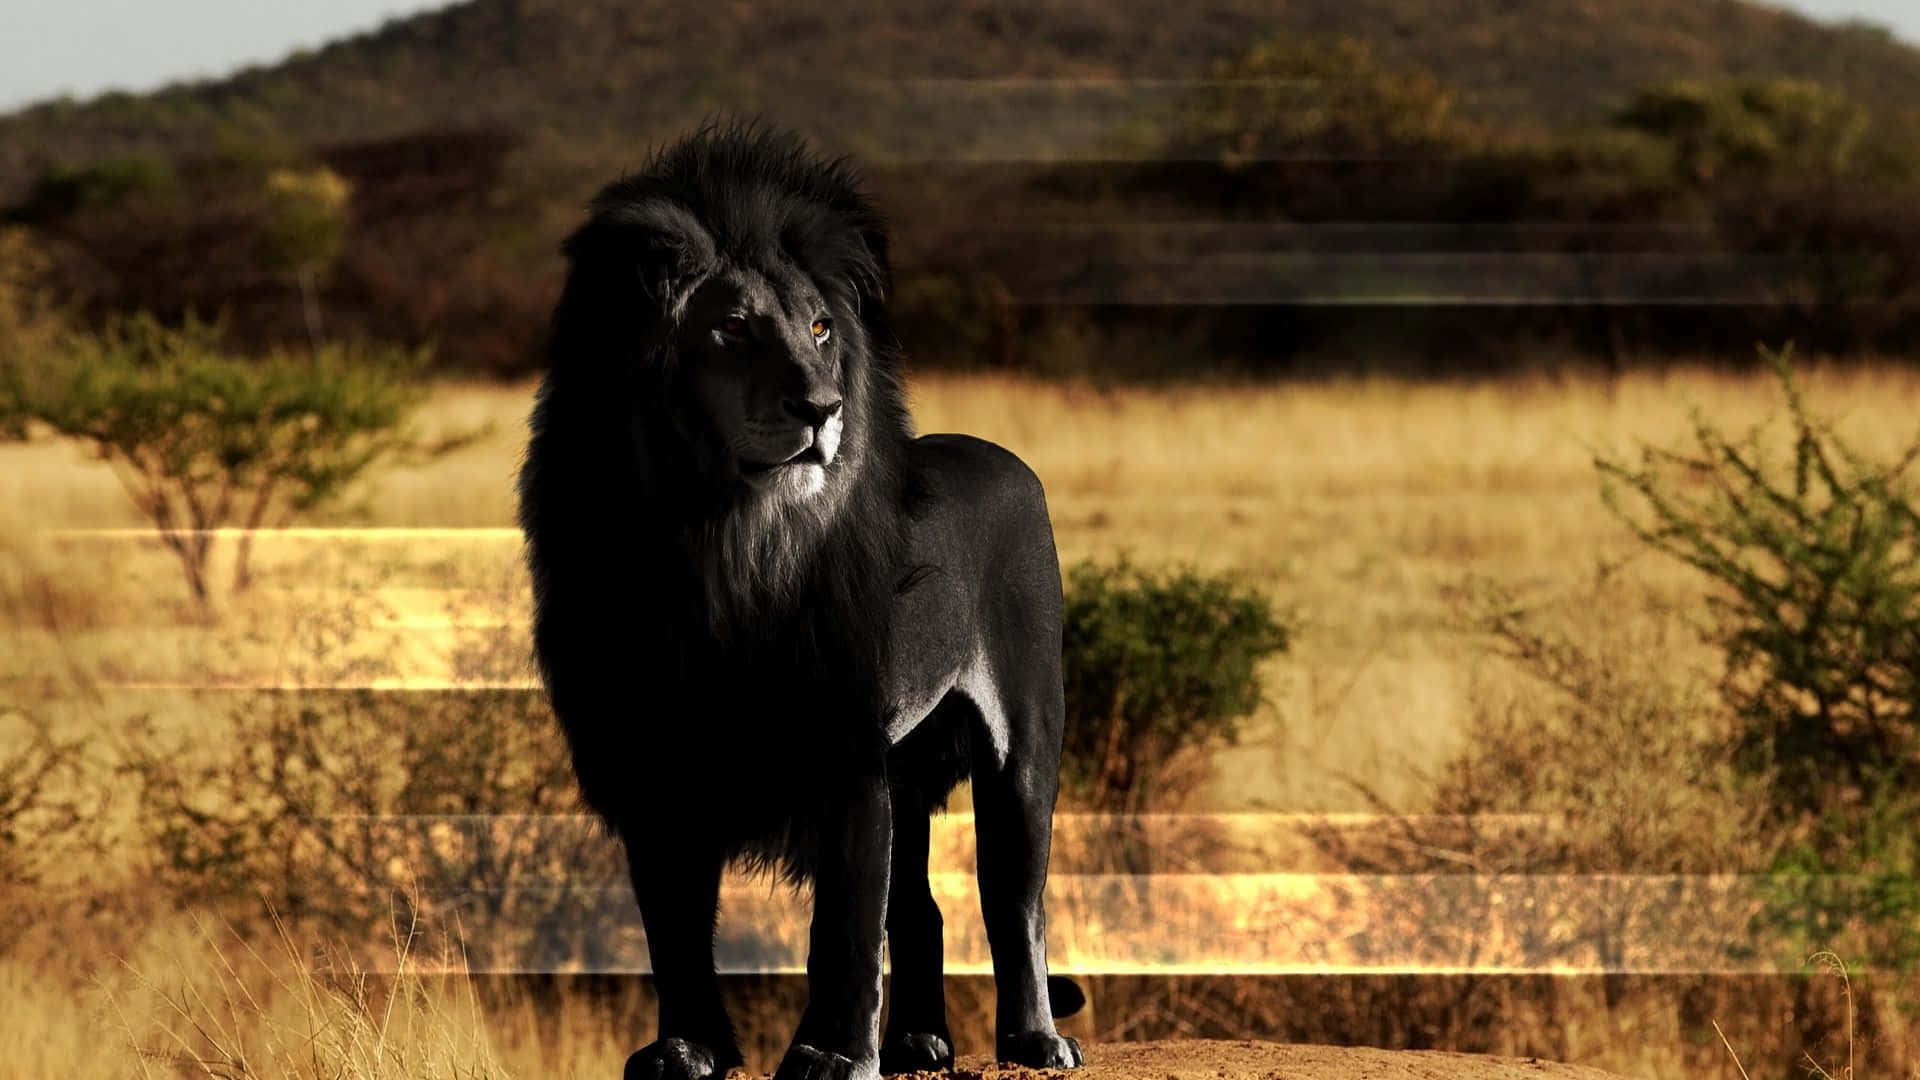 The Majesty of a Black Lion Wallpaper